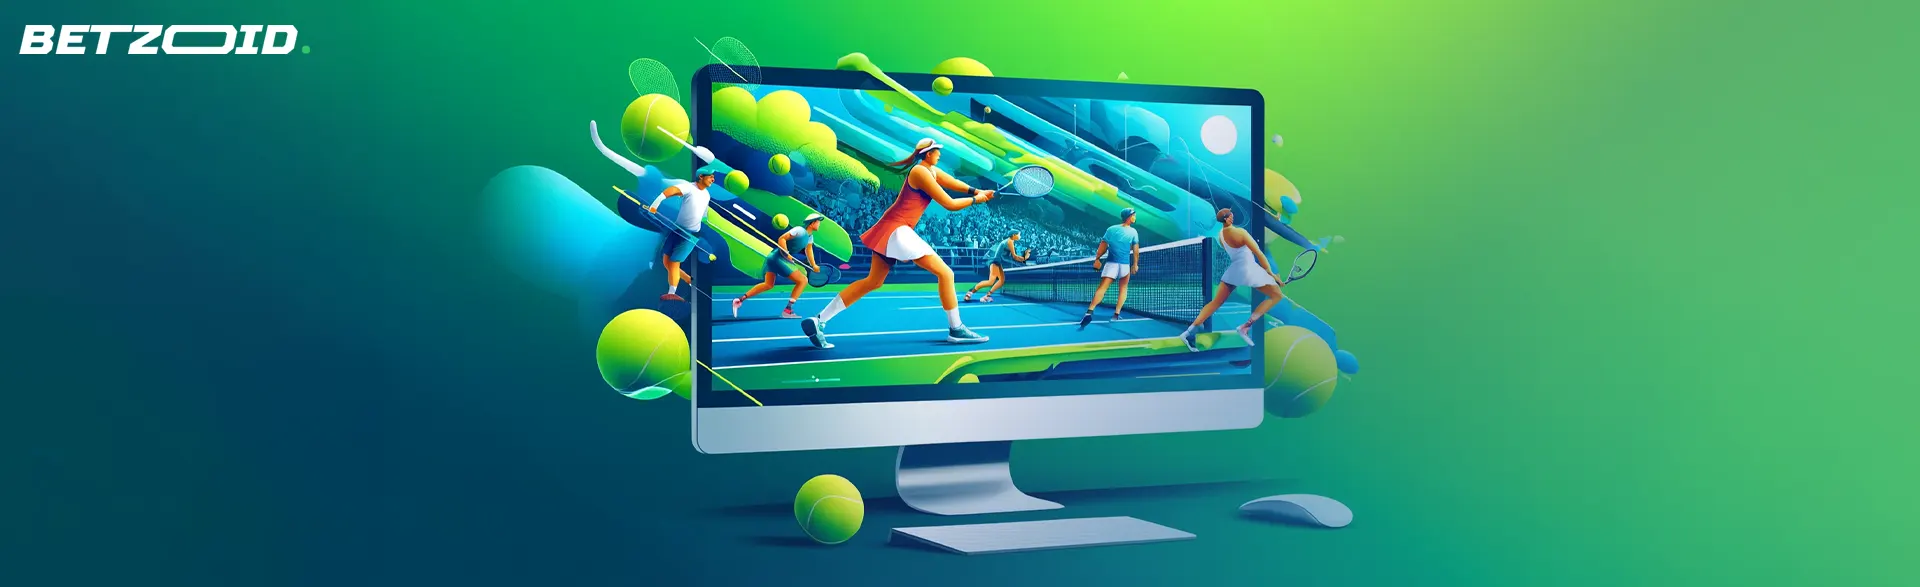 Illustration of tennis players on a computer screen, symbolizing no ID sports betting.